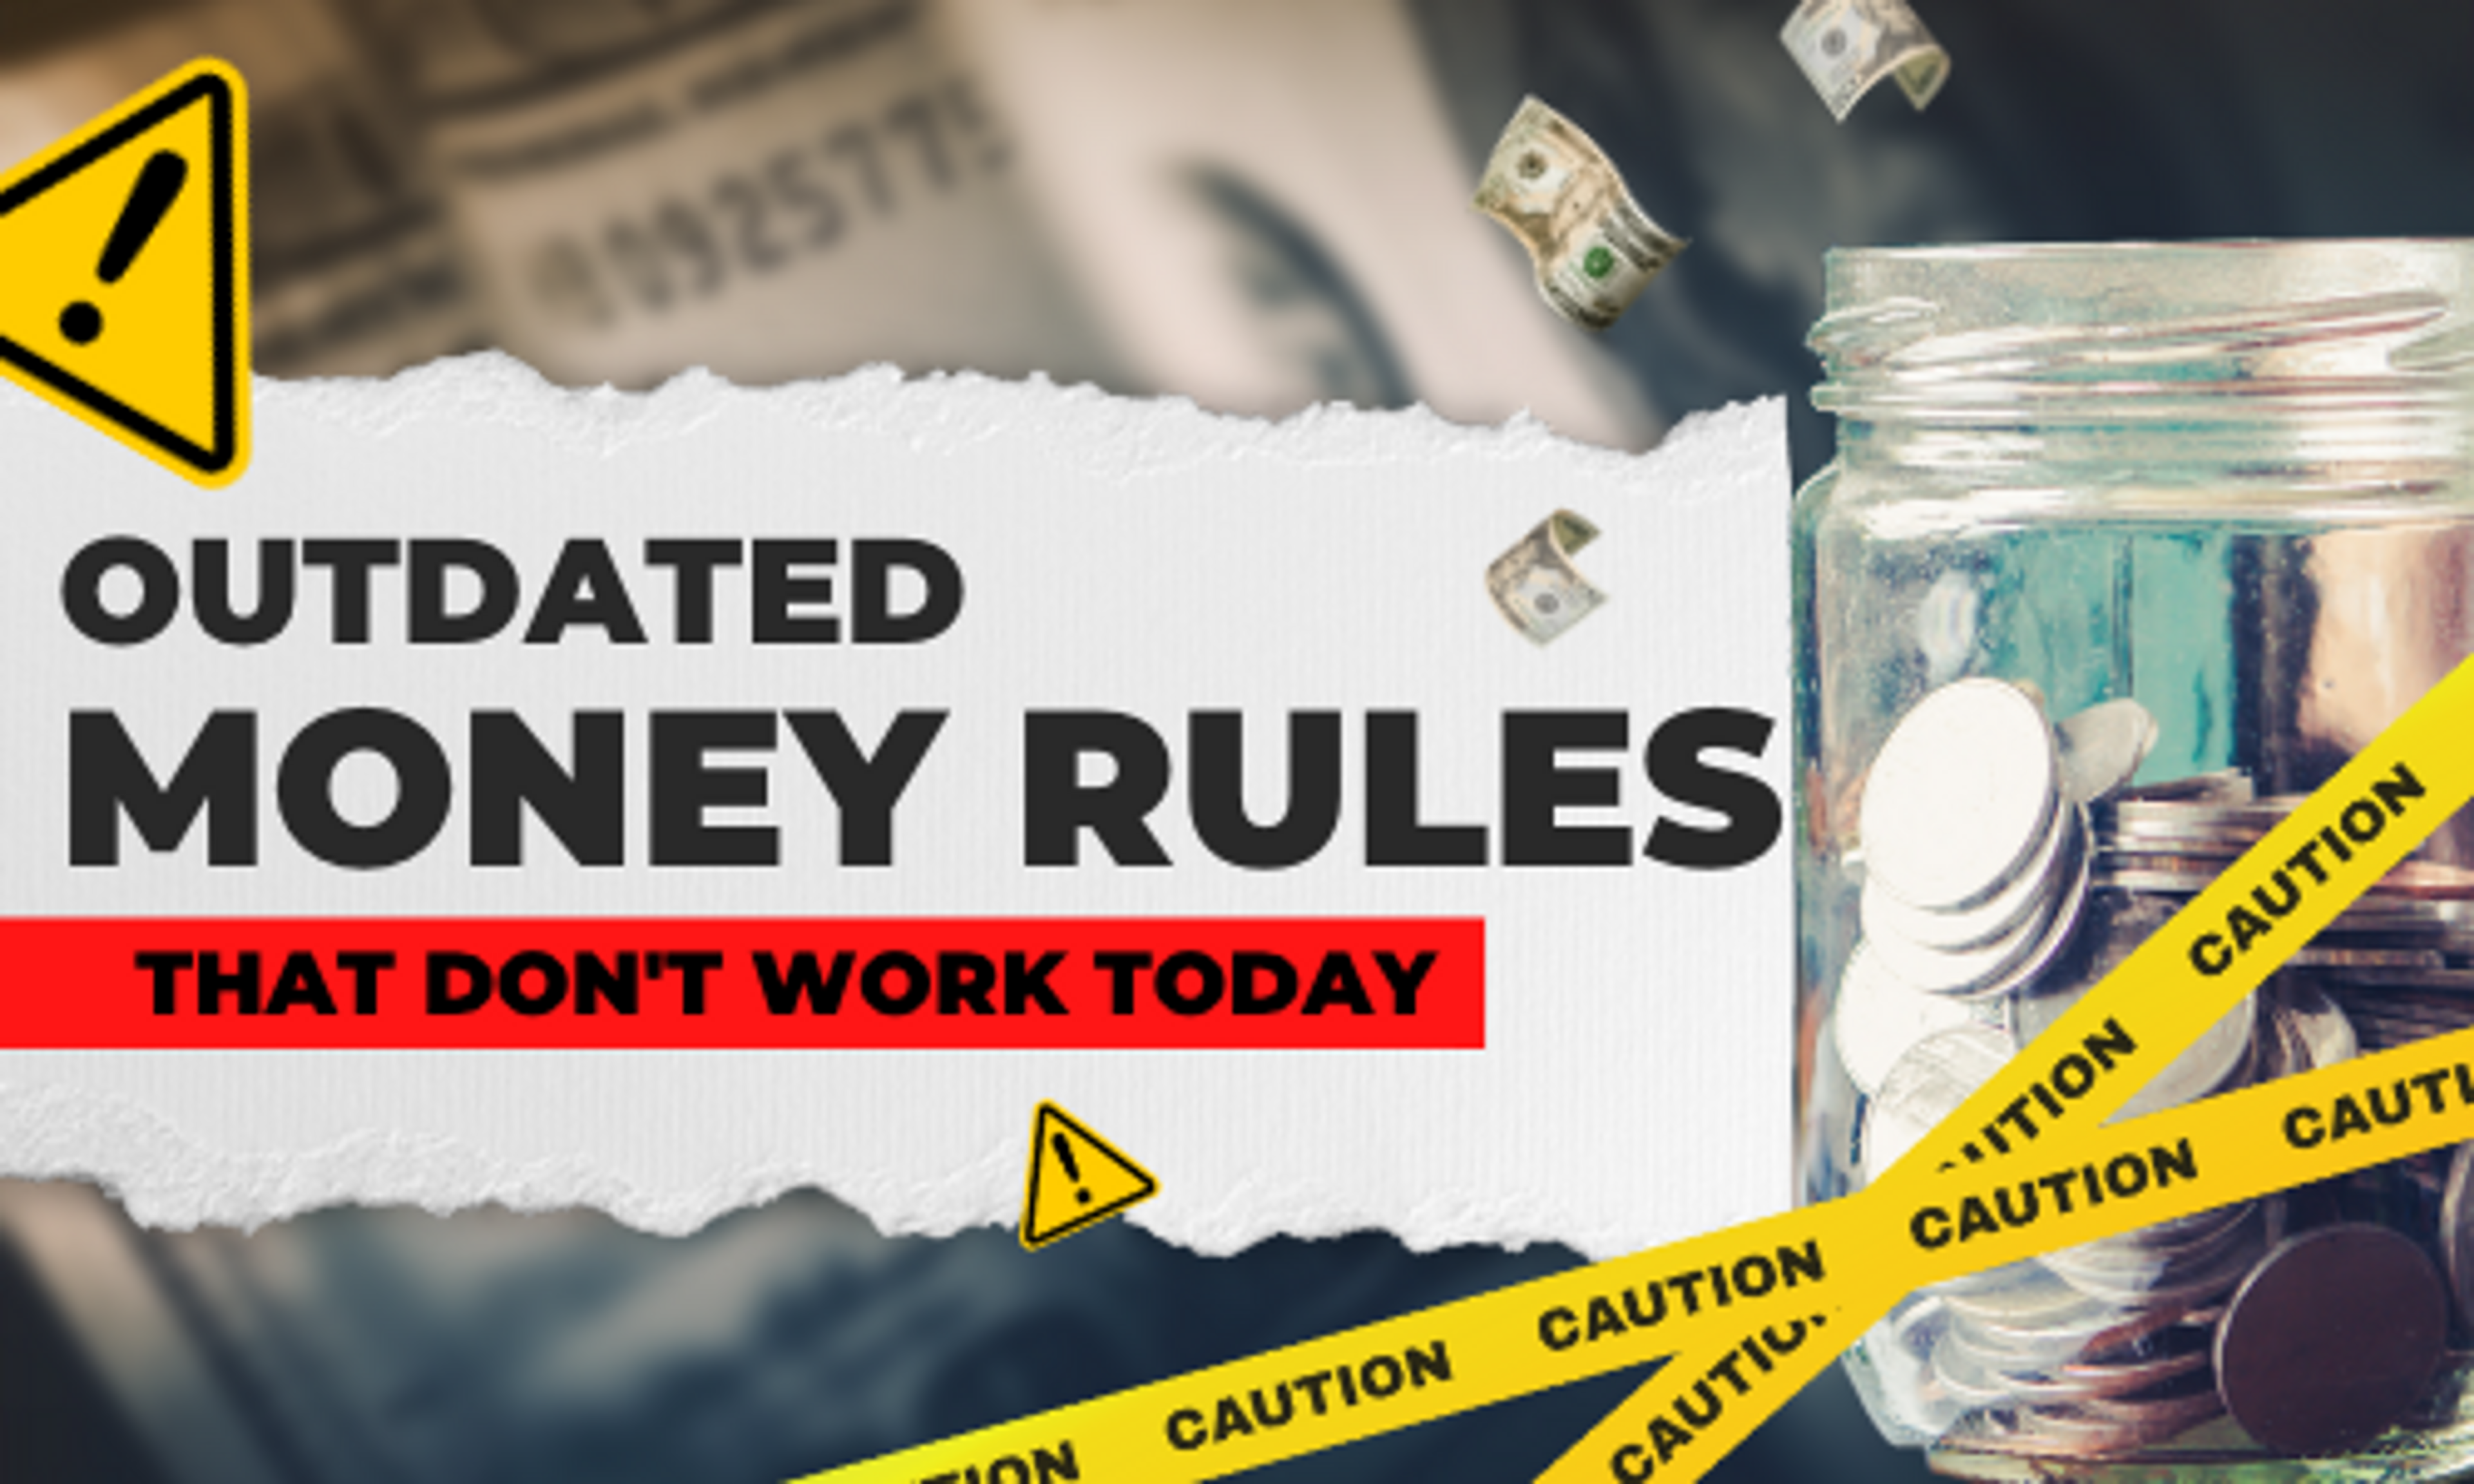 Outdated money rules